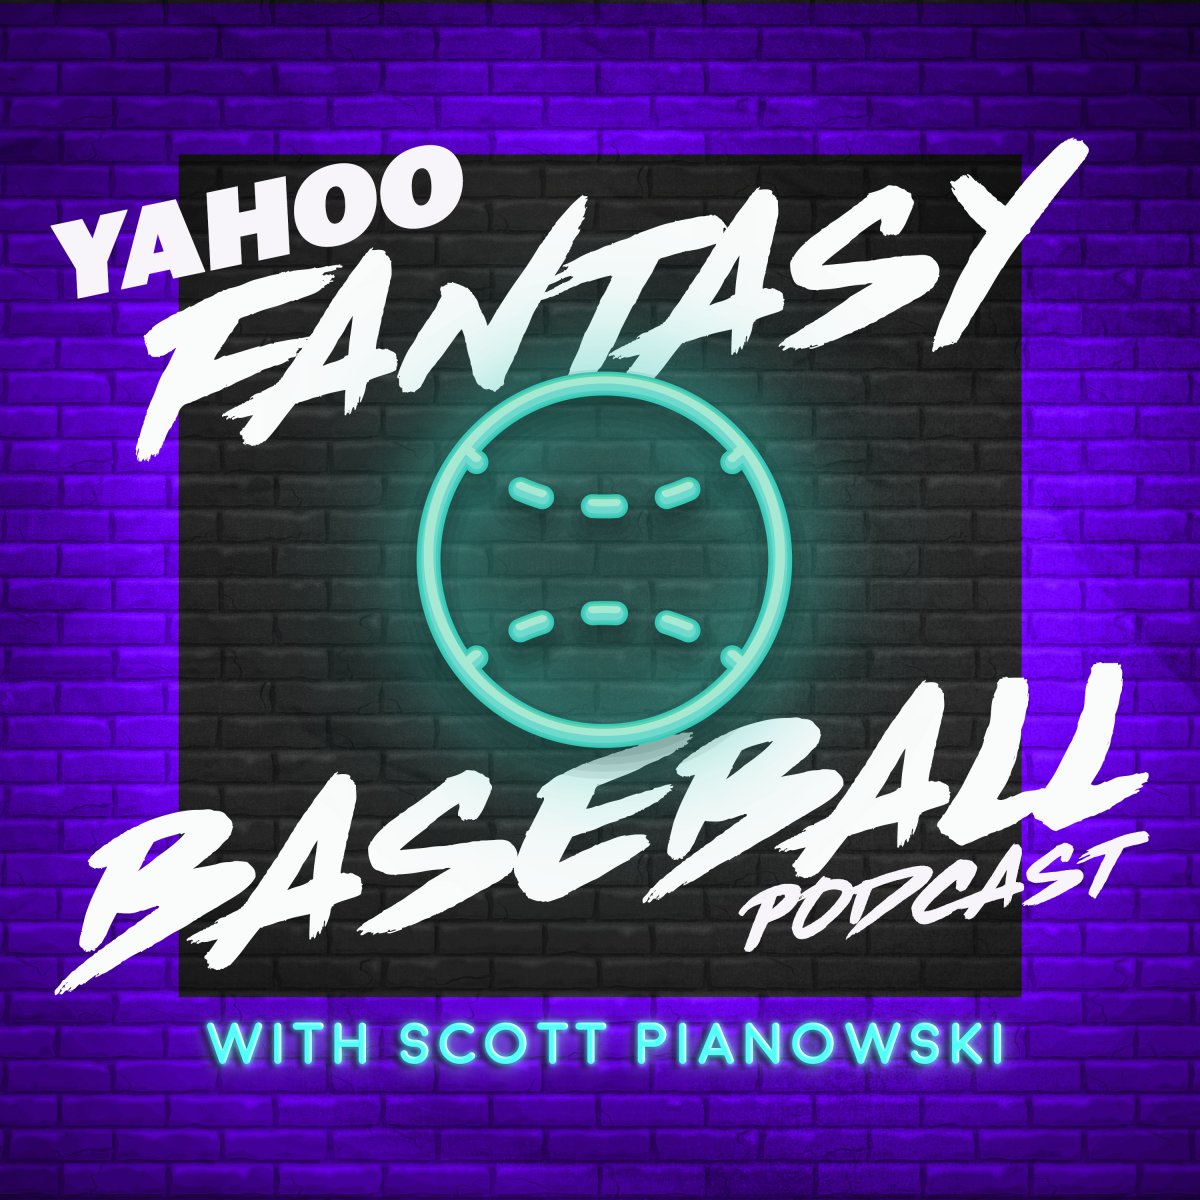 The Yahoo Fantasy Baseball Podcast premieres on March 4